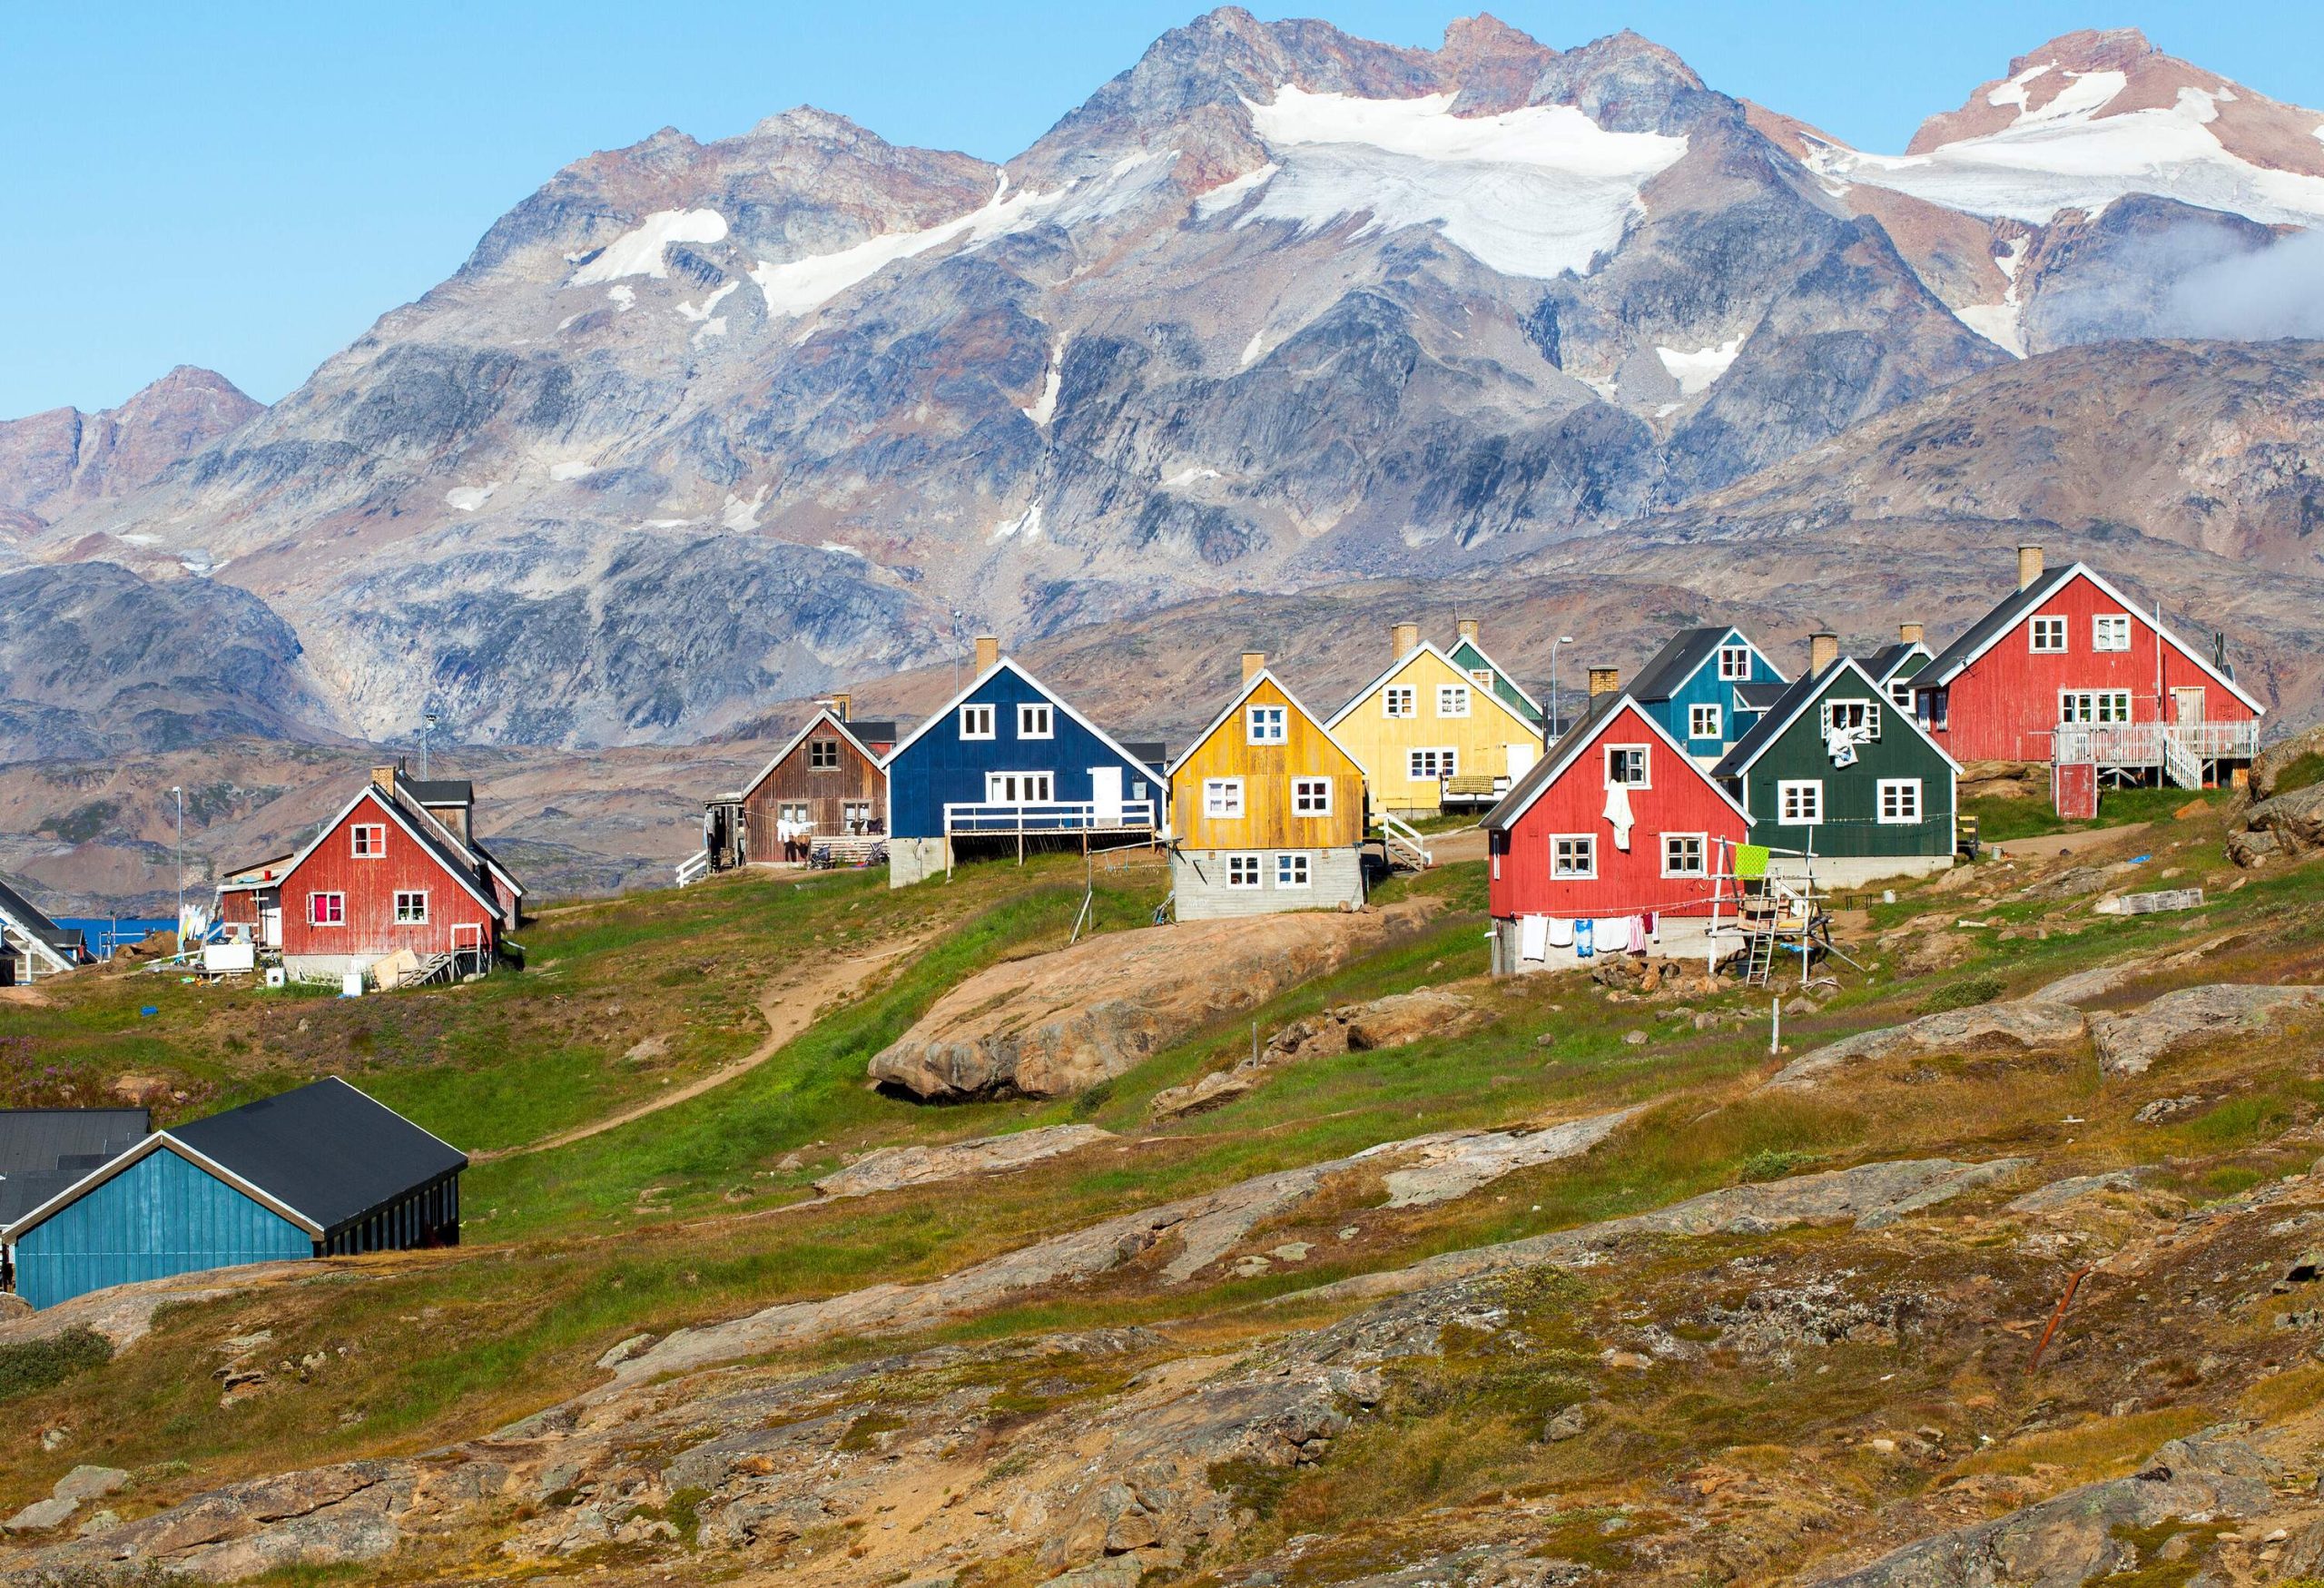 A scenic view of colourful houses slopes against the steep stone mountains.